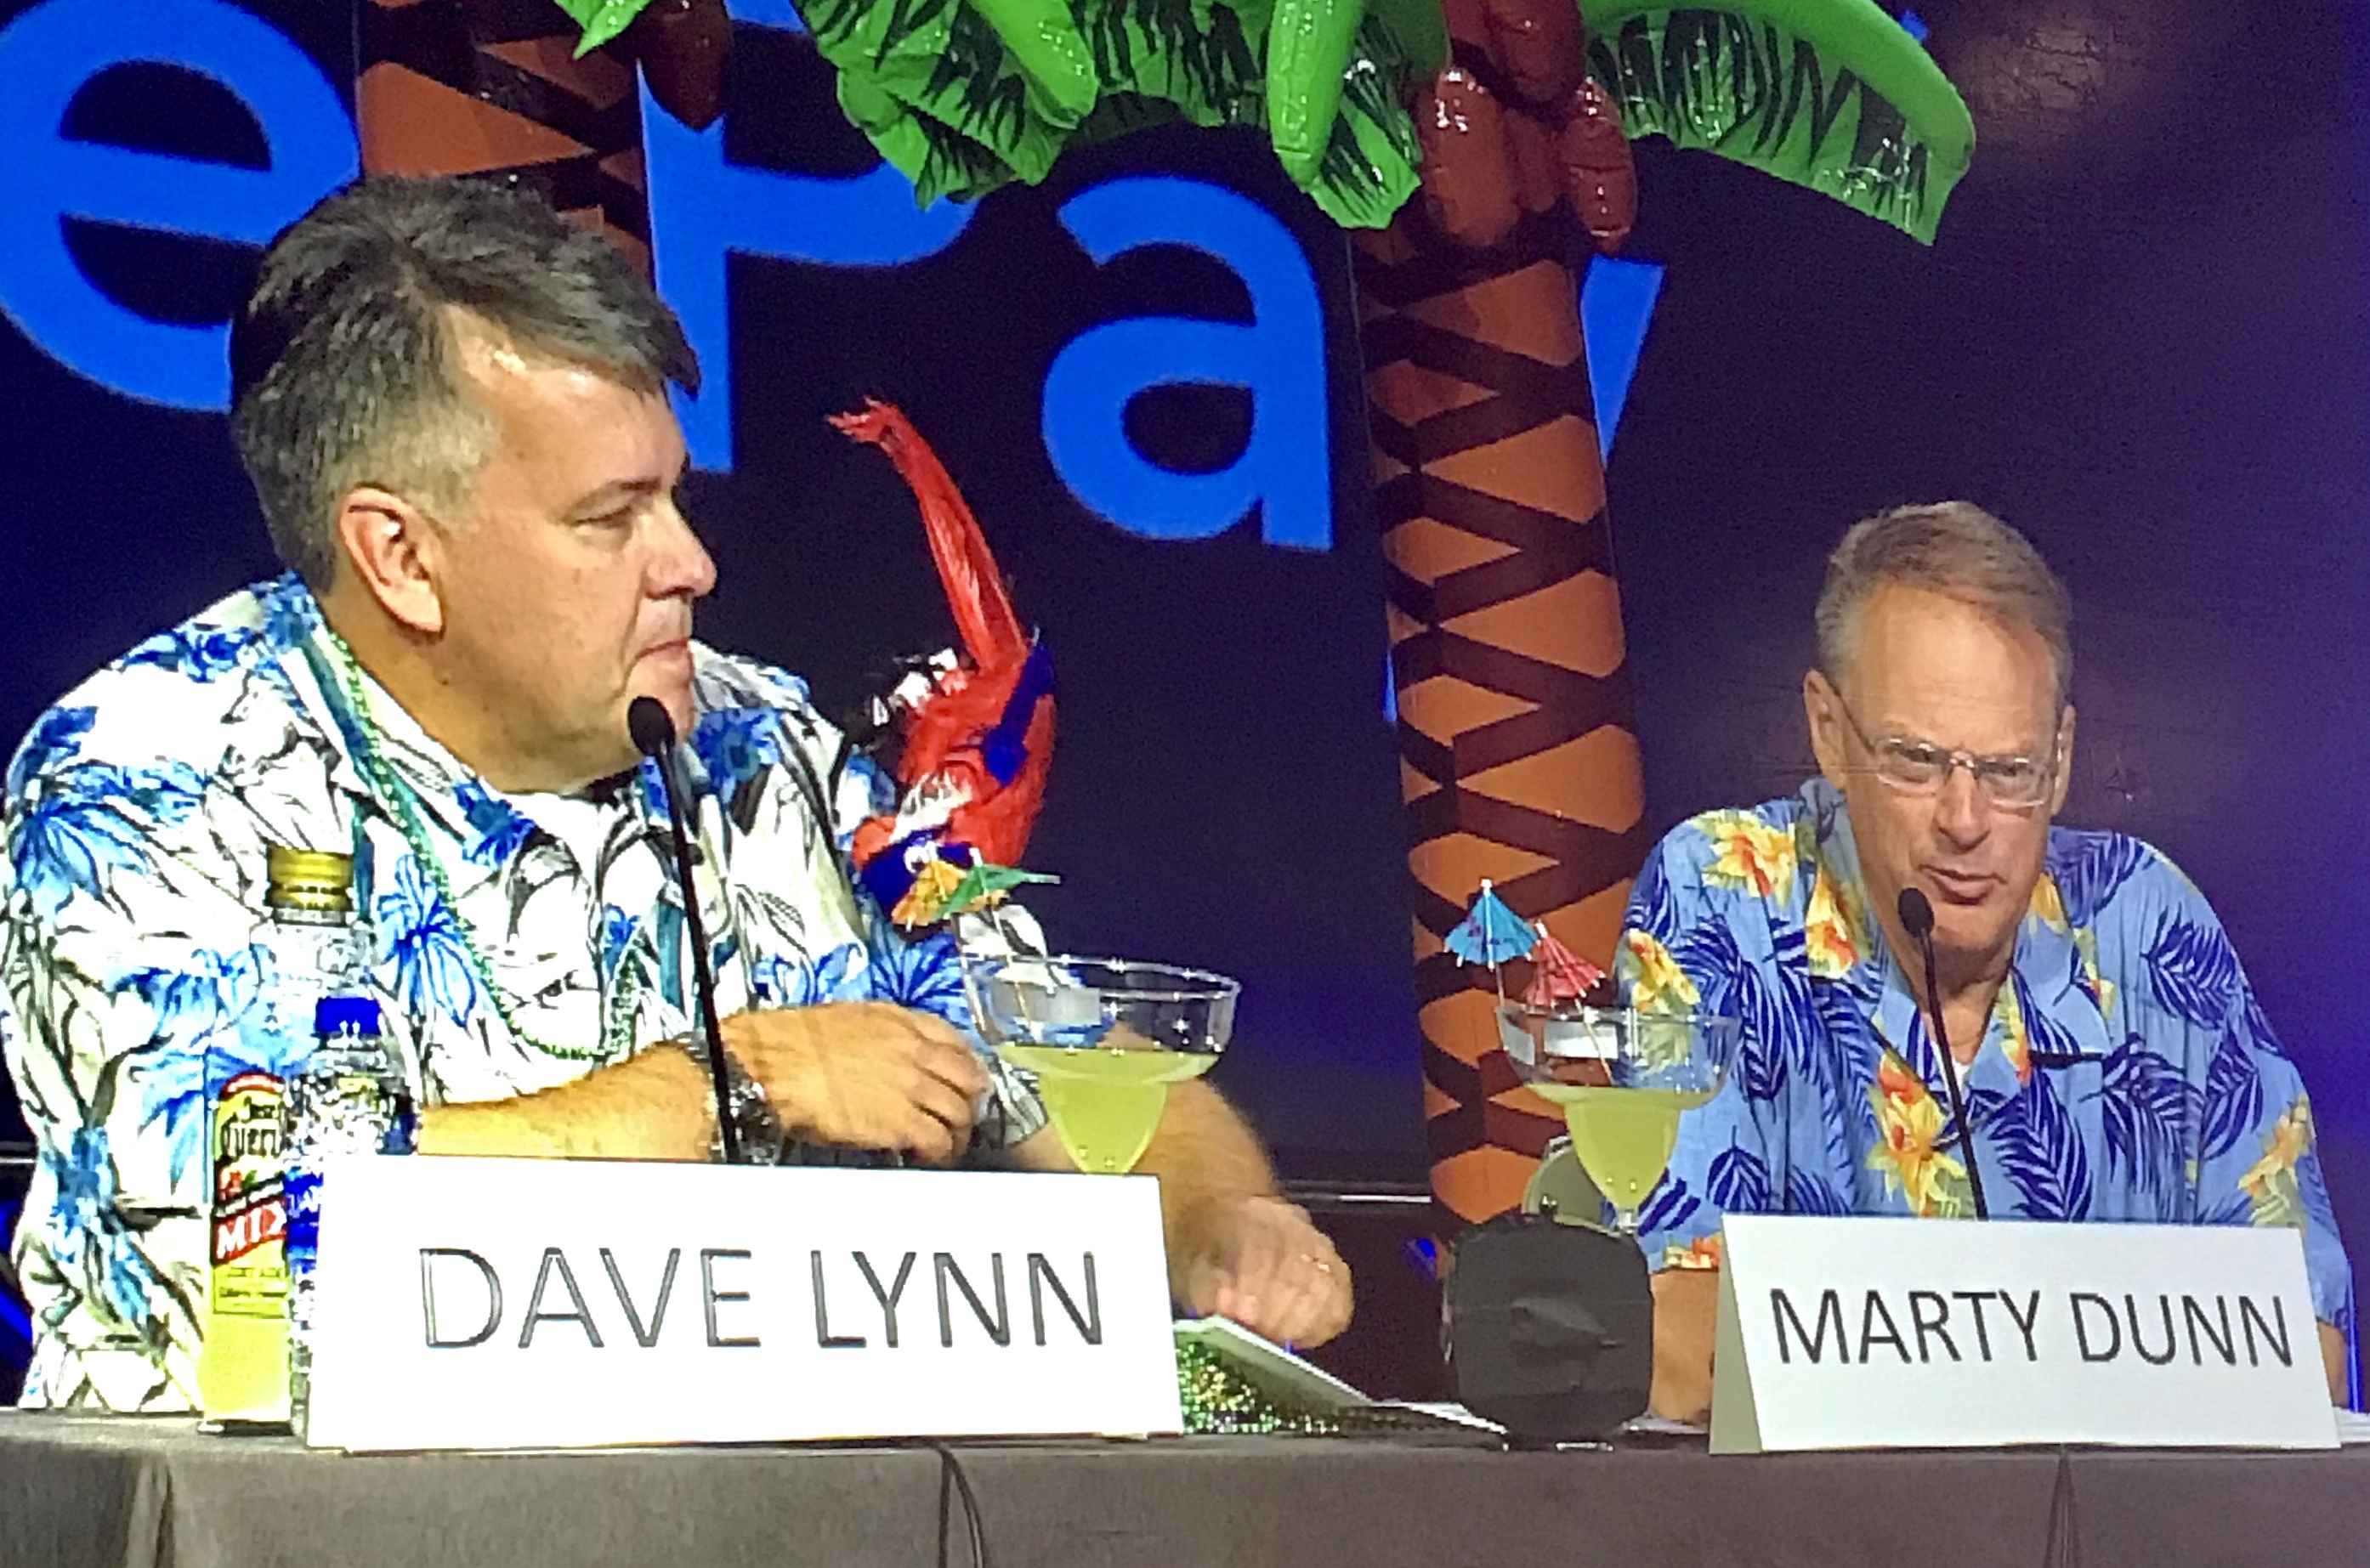 Dave Lynn & Marty Dunn 'I Like It Like That' at Proxy Disclosure Conference (2019)